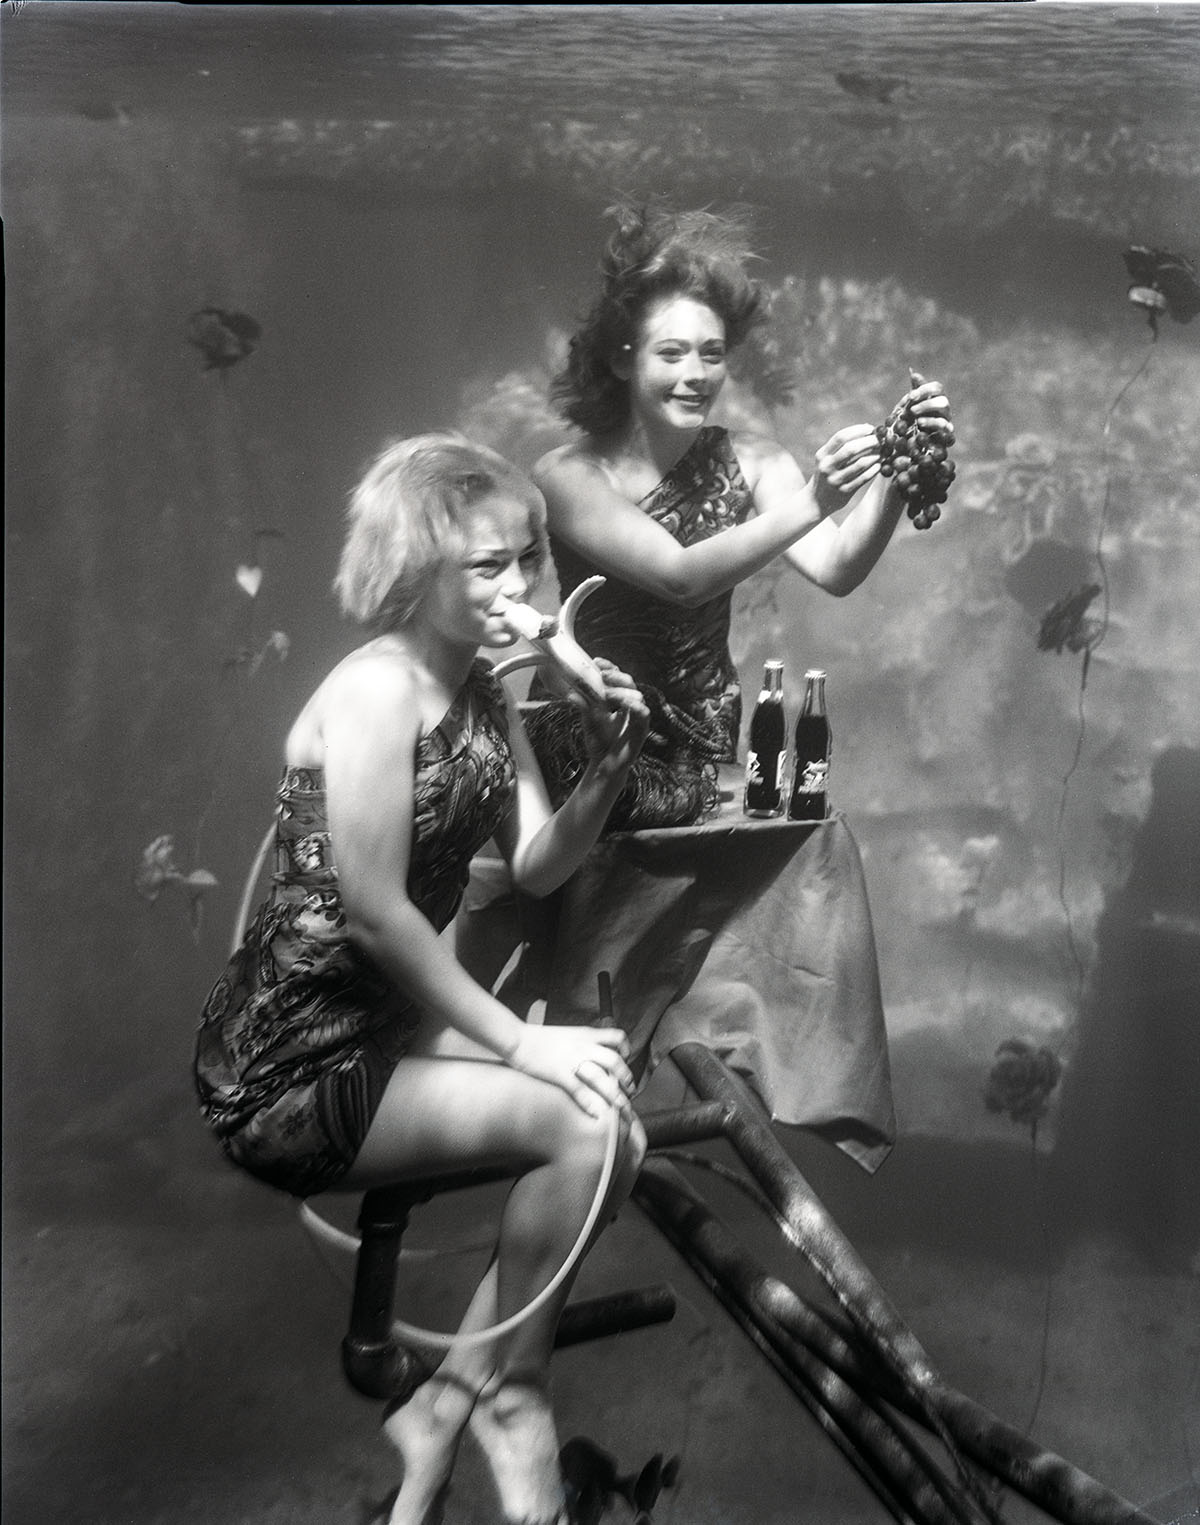 Two women perform underwater surrounded by bubbles in a black and white photograph